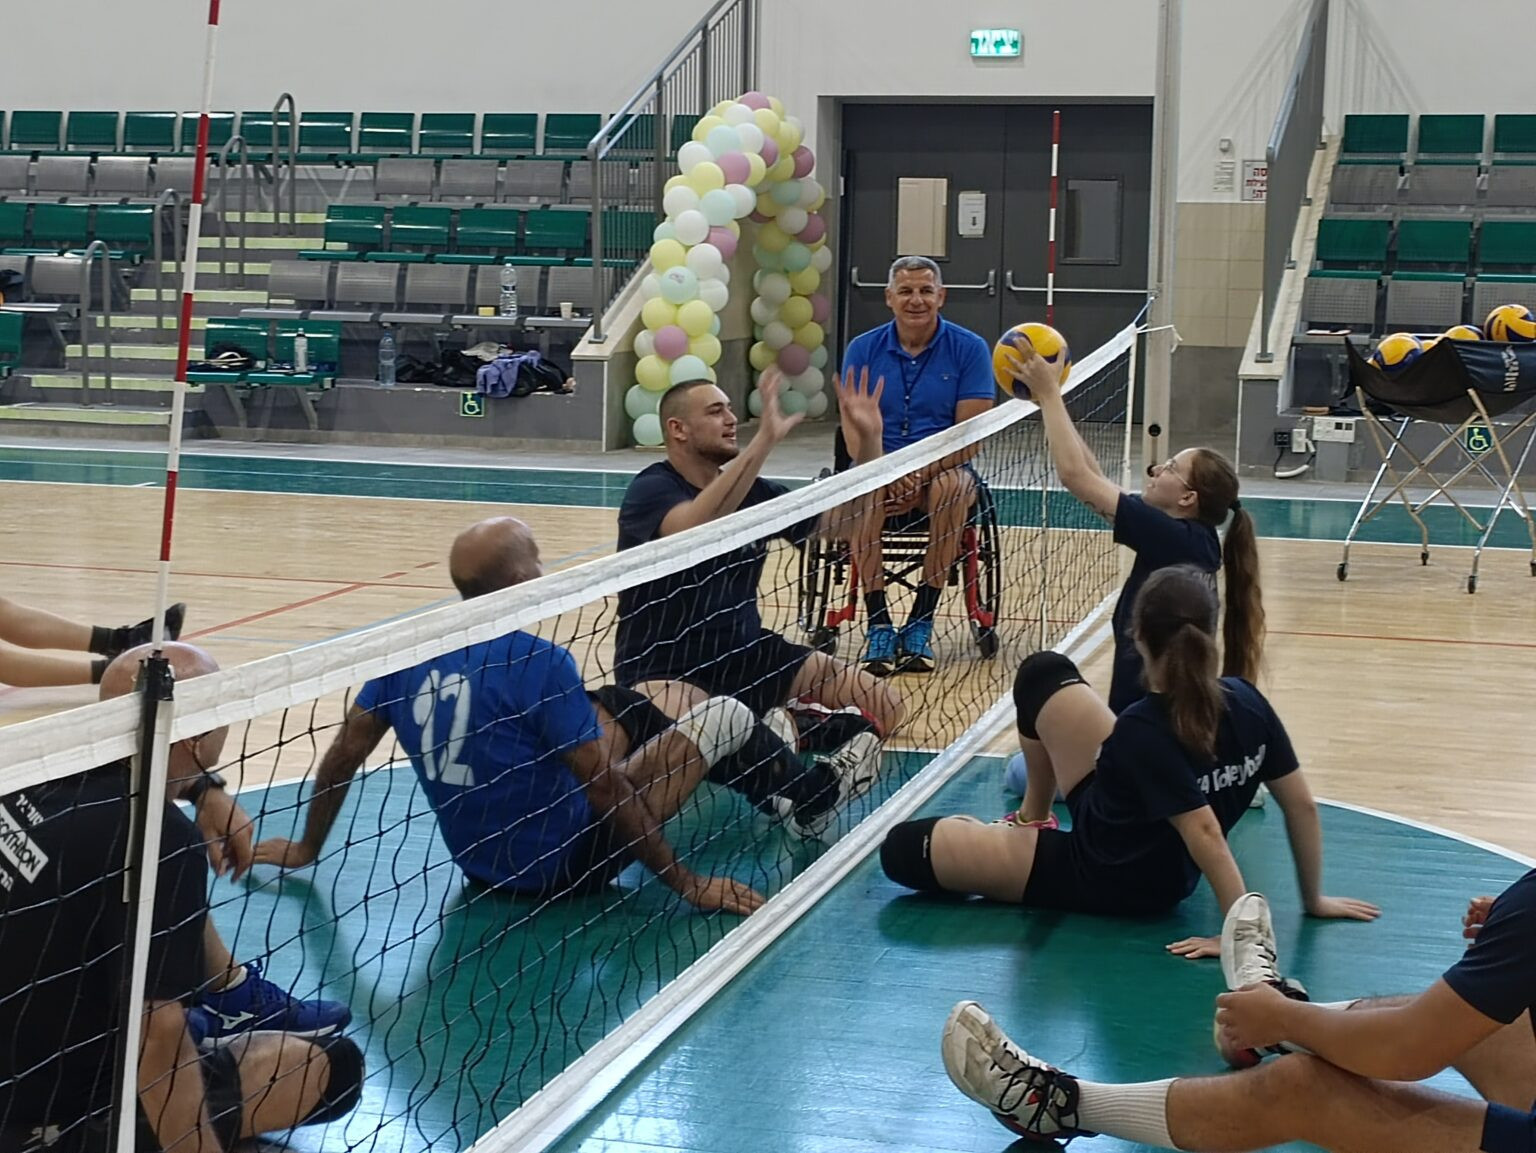 ParaVolley Europe signs sitting volleyball MoU with bodies from Israel, Spain and Kosovo